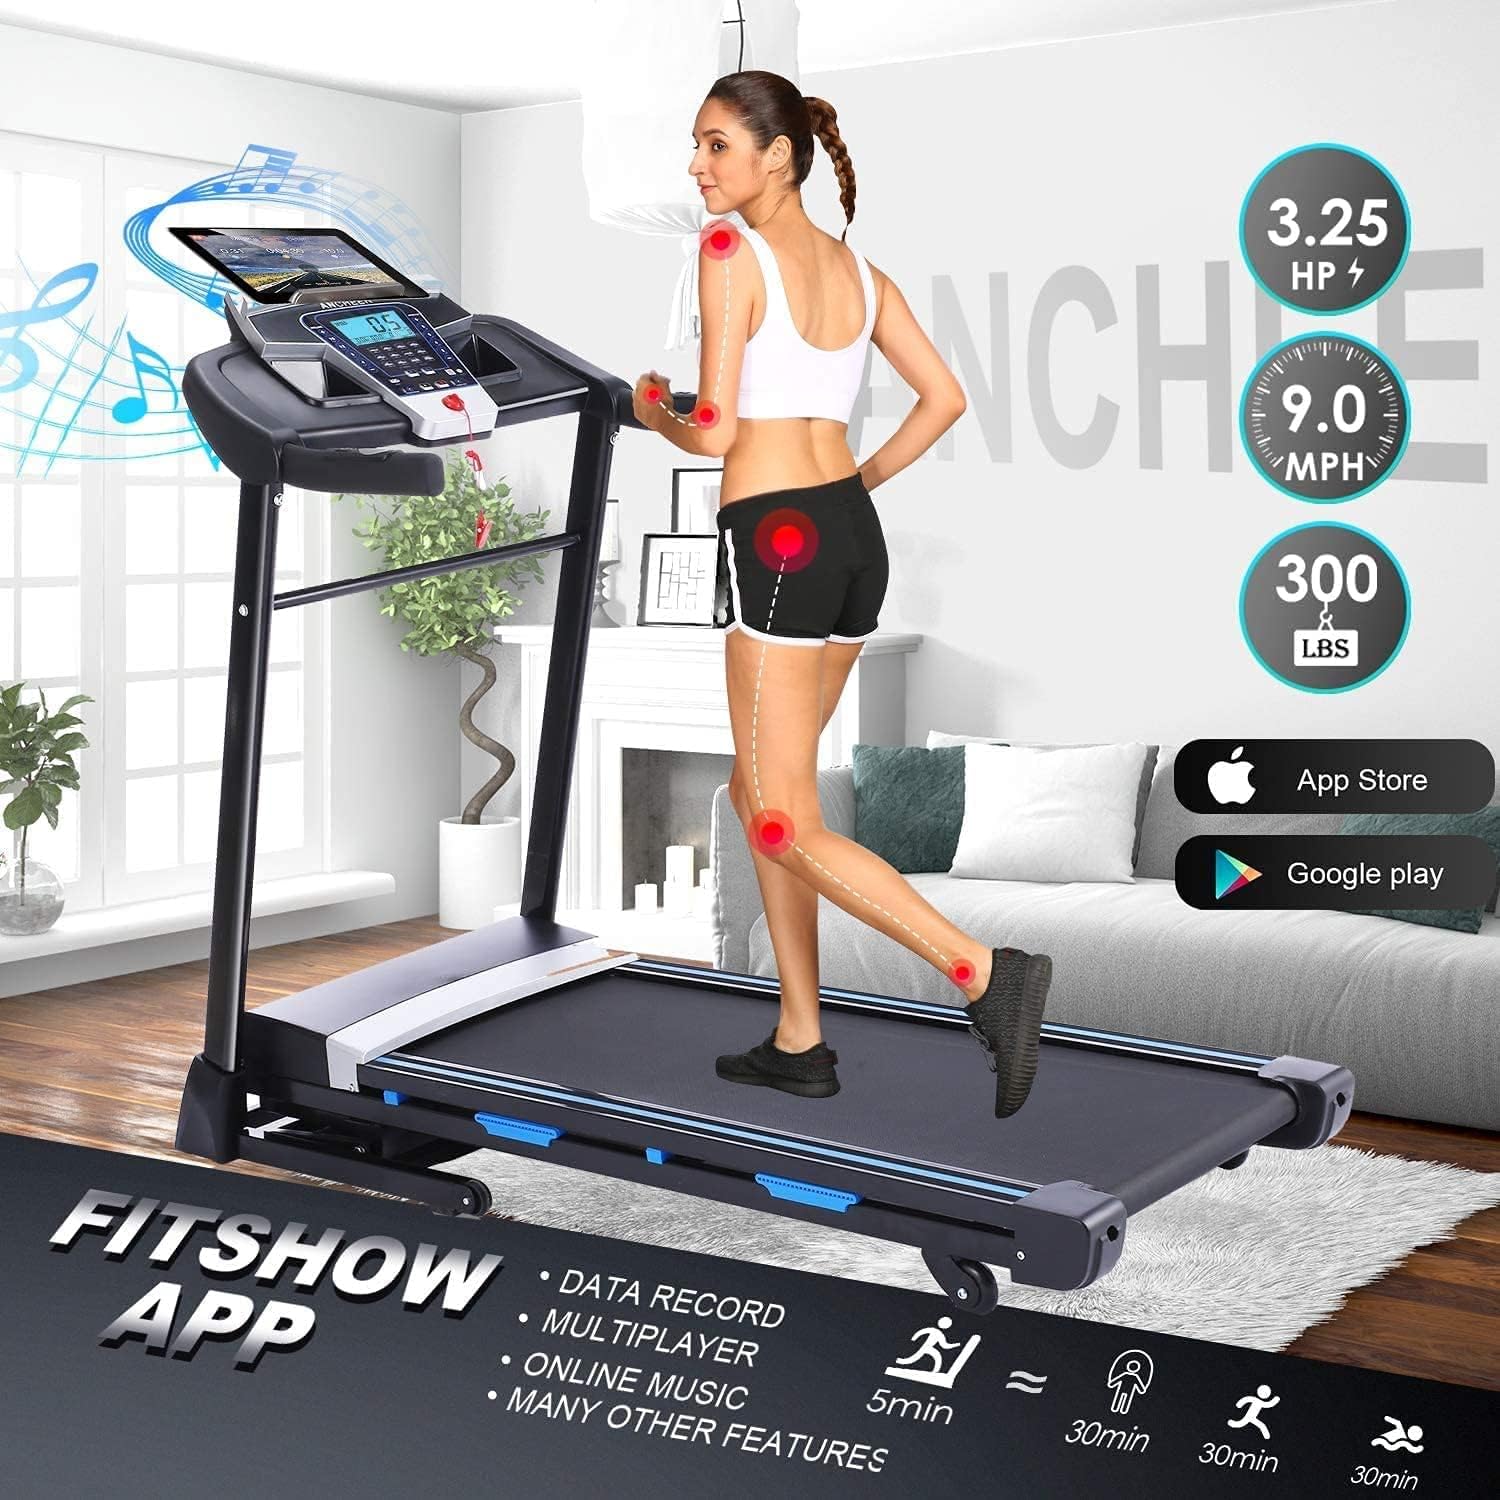 ANCHEER Treadmill 3.25HP Motor, Treadmills with Auto Incline 15%, Electric Running Machine for Home Gym Cardio Training, 300LB Capacity Foldable Treadmill for Home